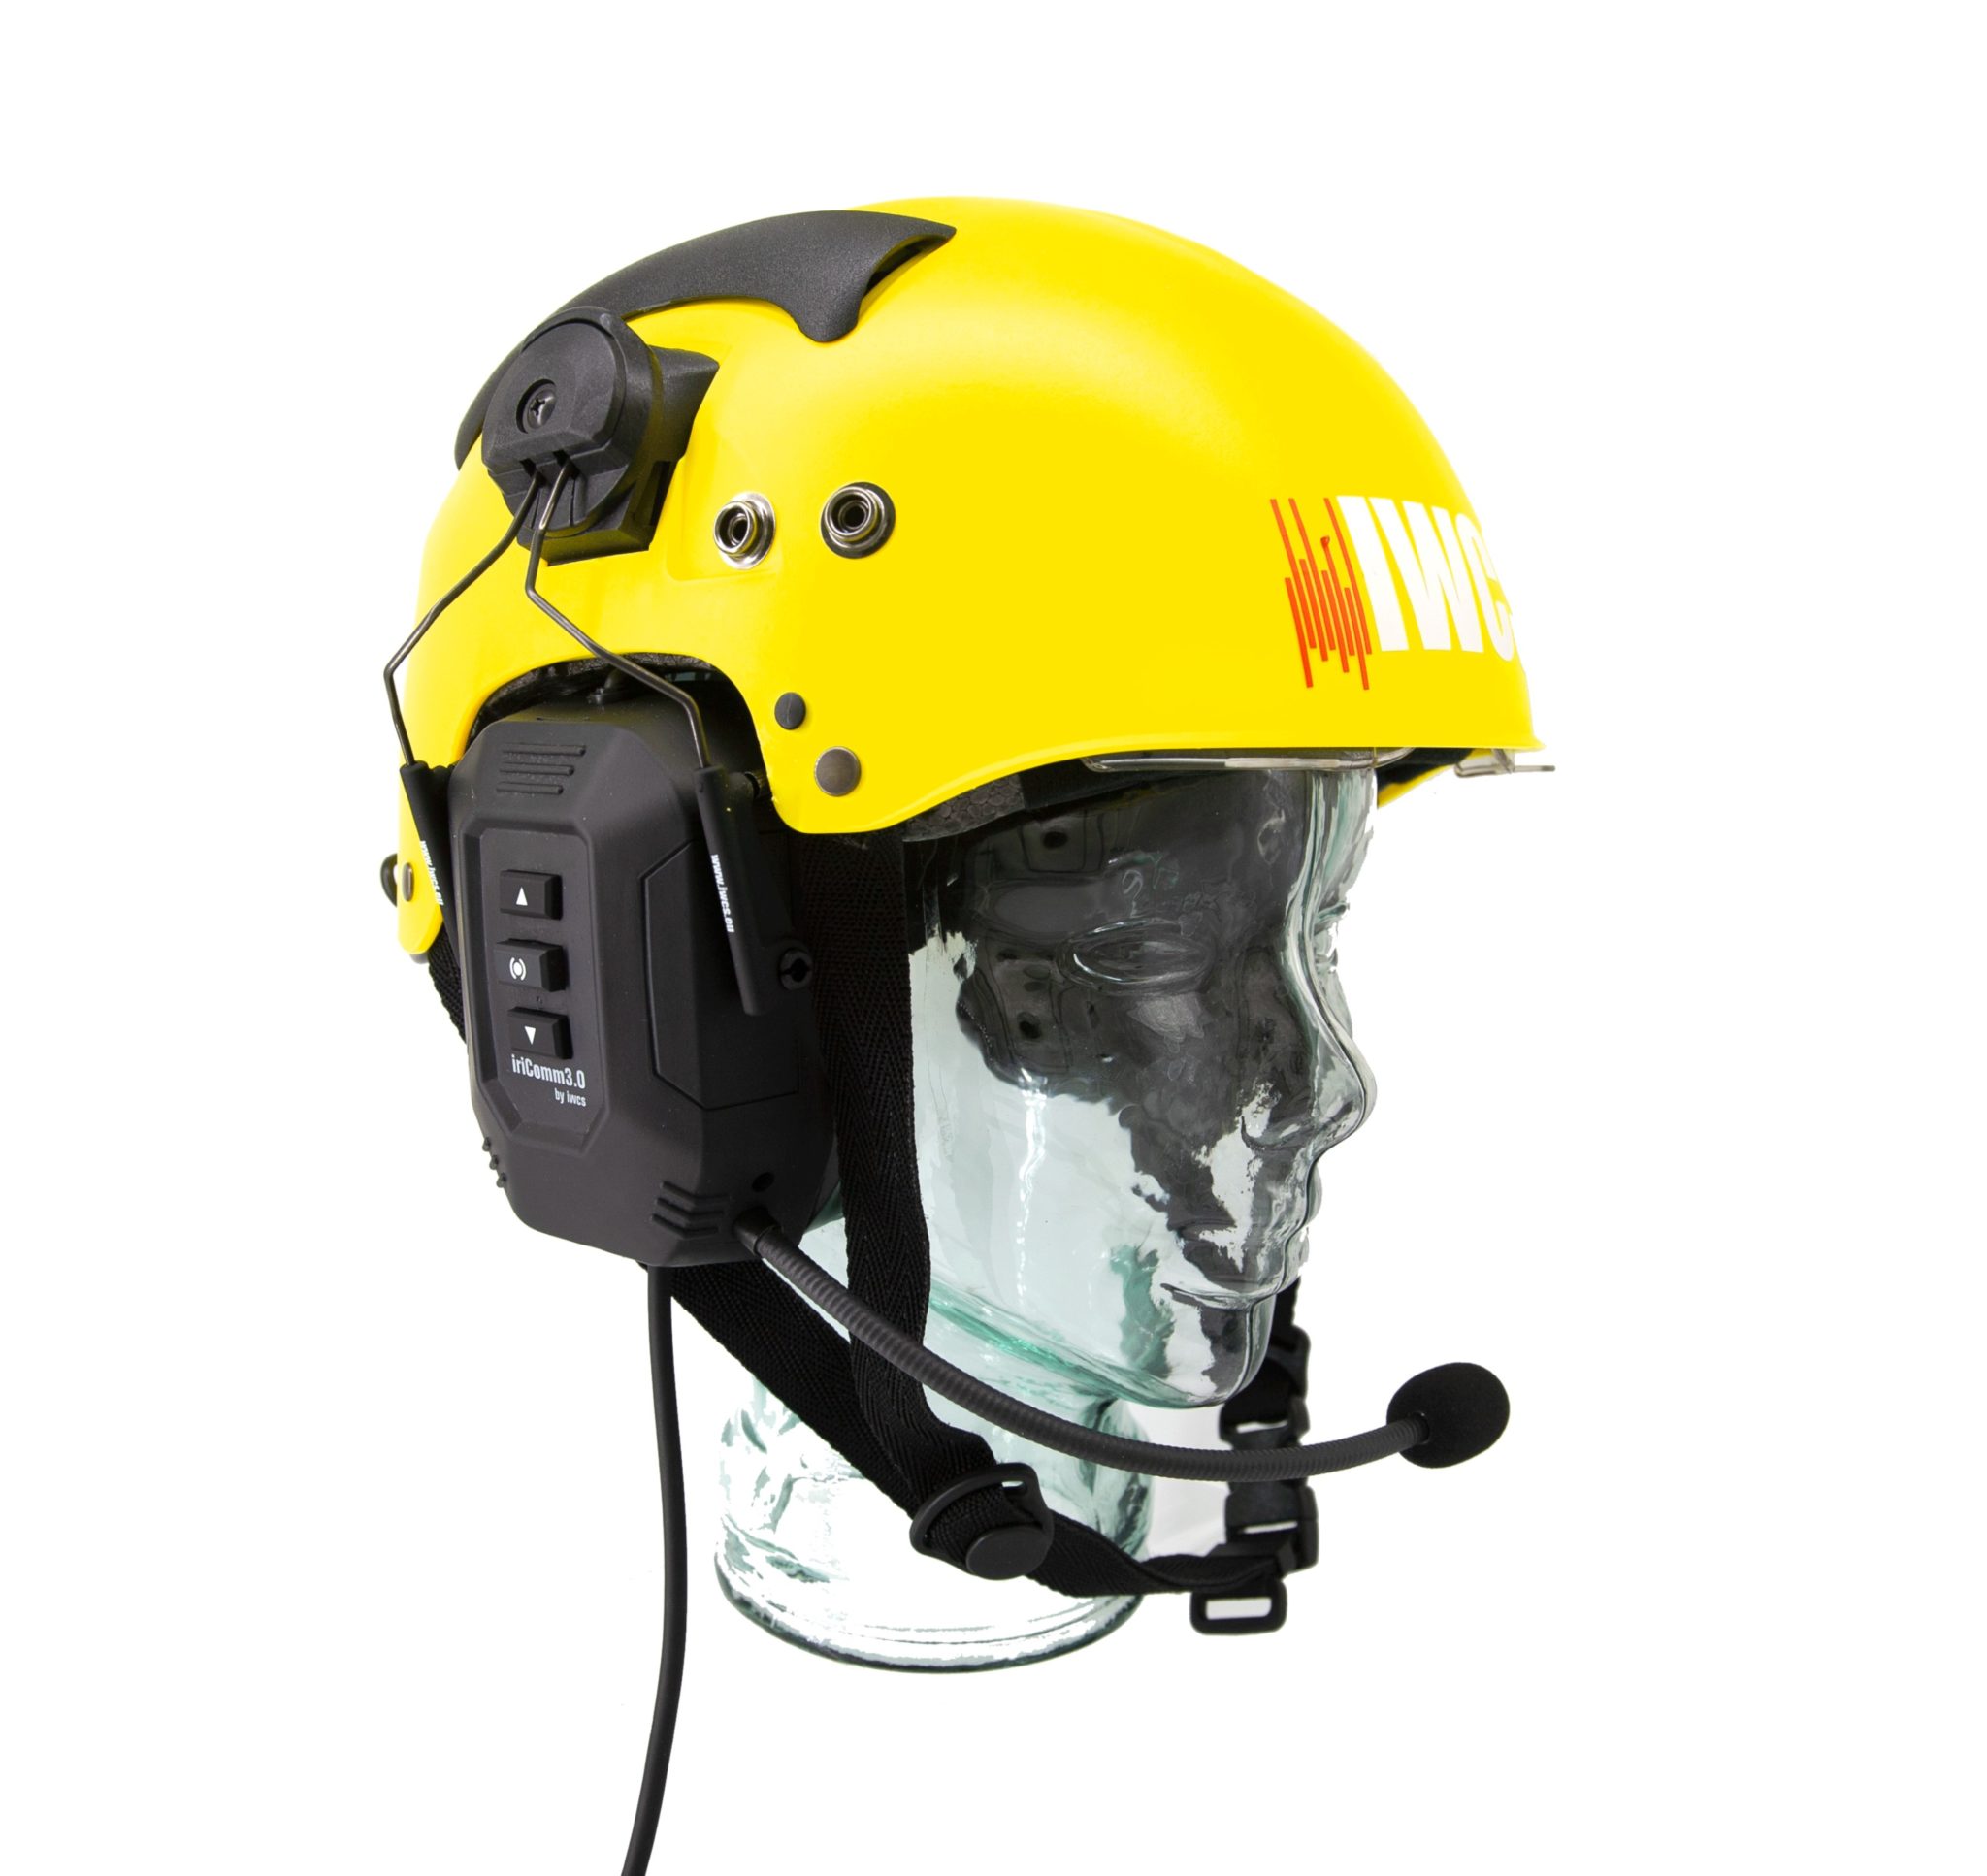 Waterproof and crystal clear communication - helmets